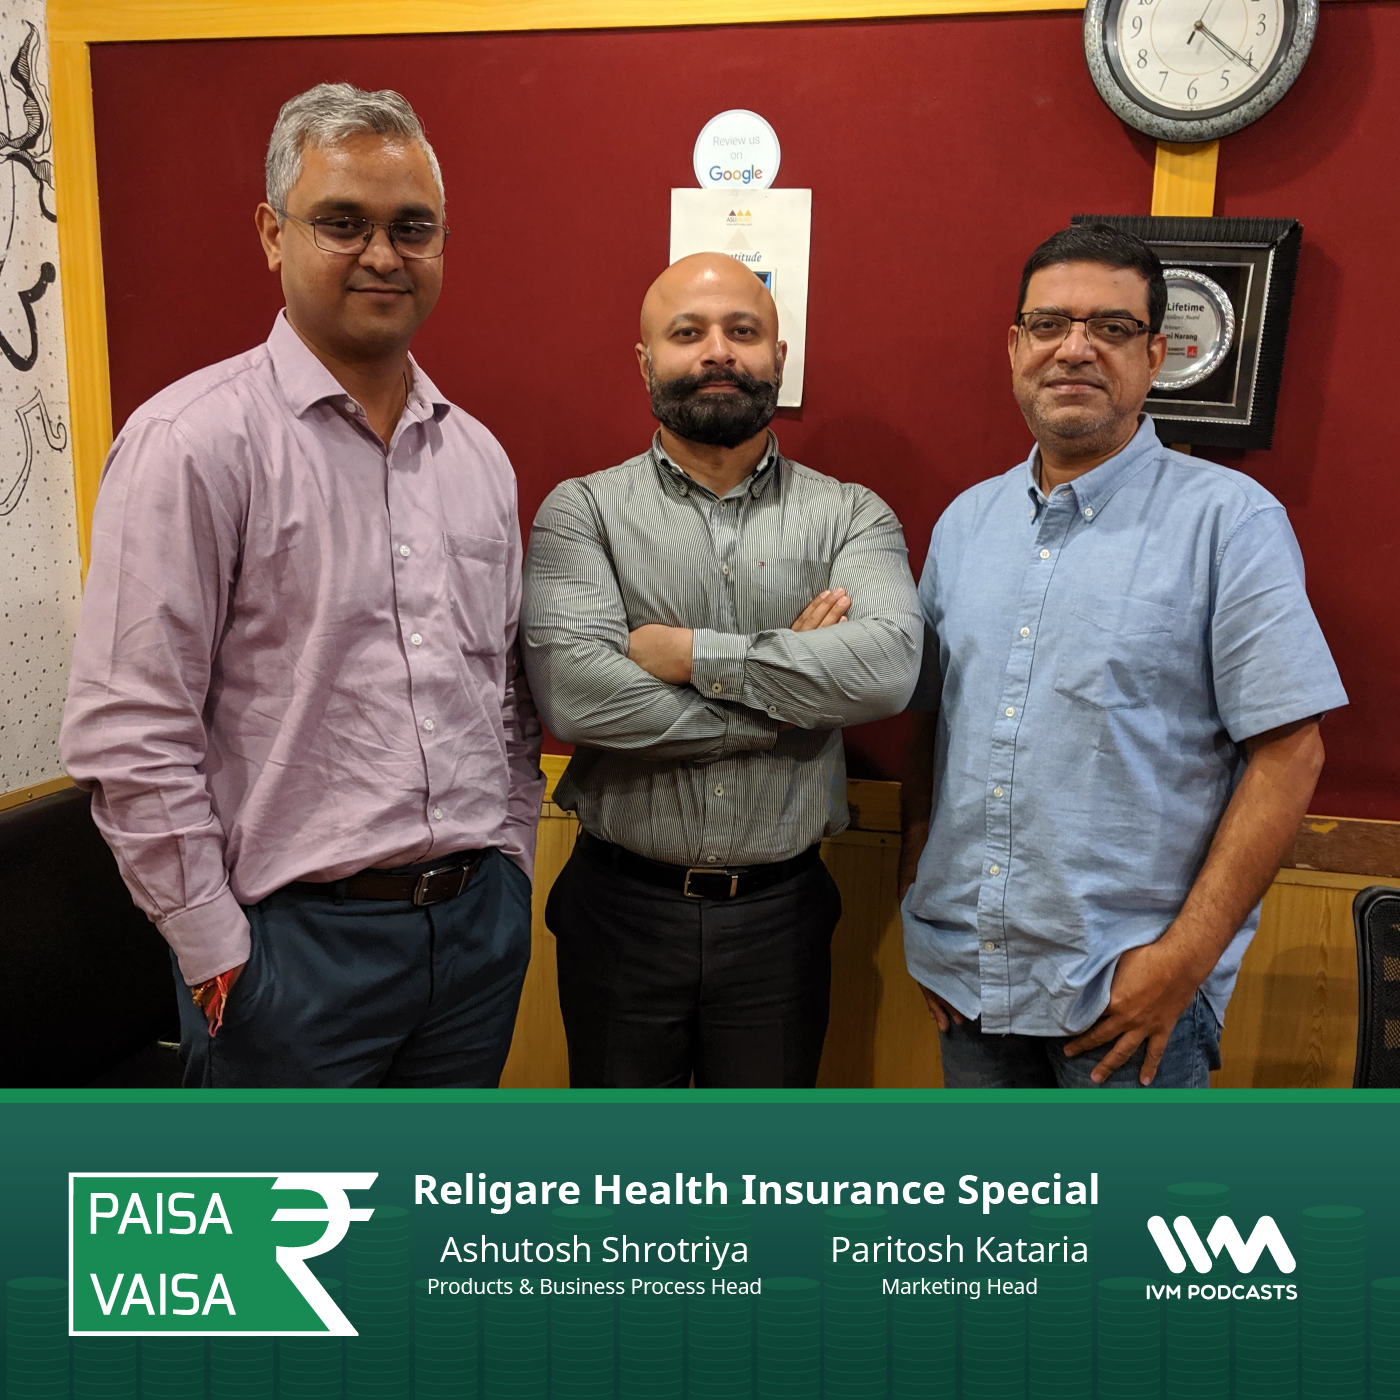 Ep. 213: Religare Health Insurance Special